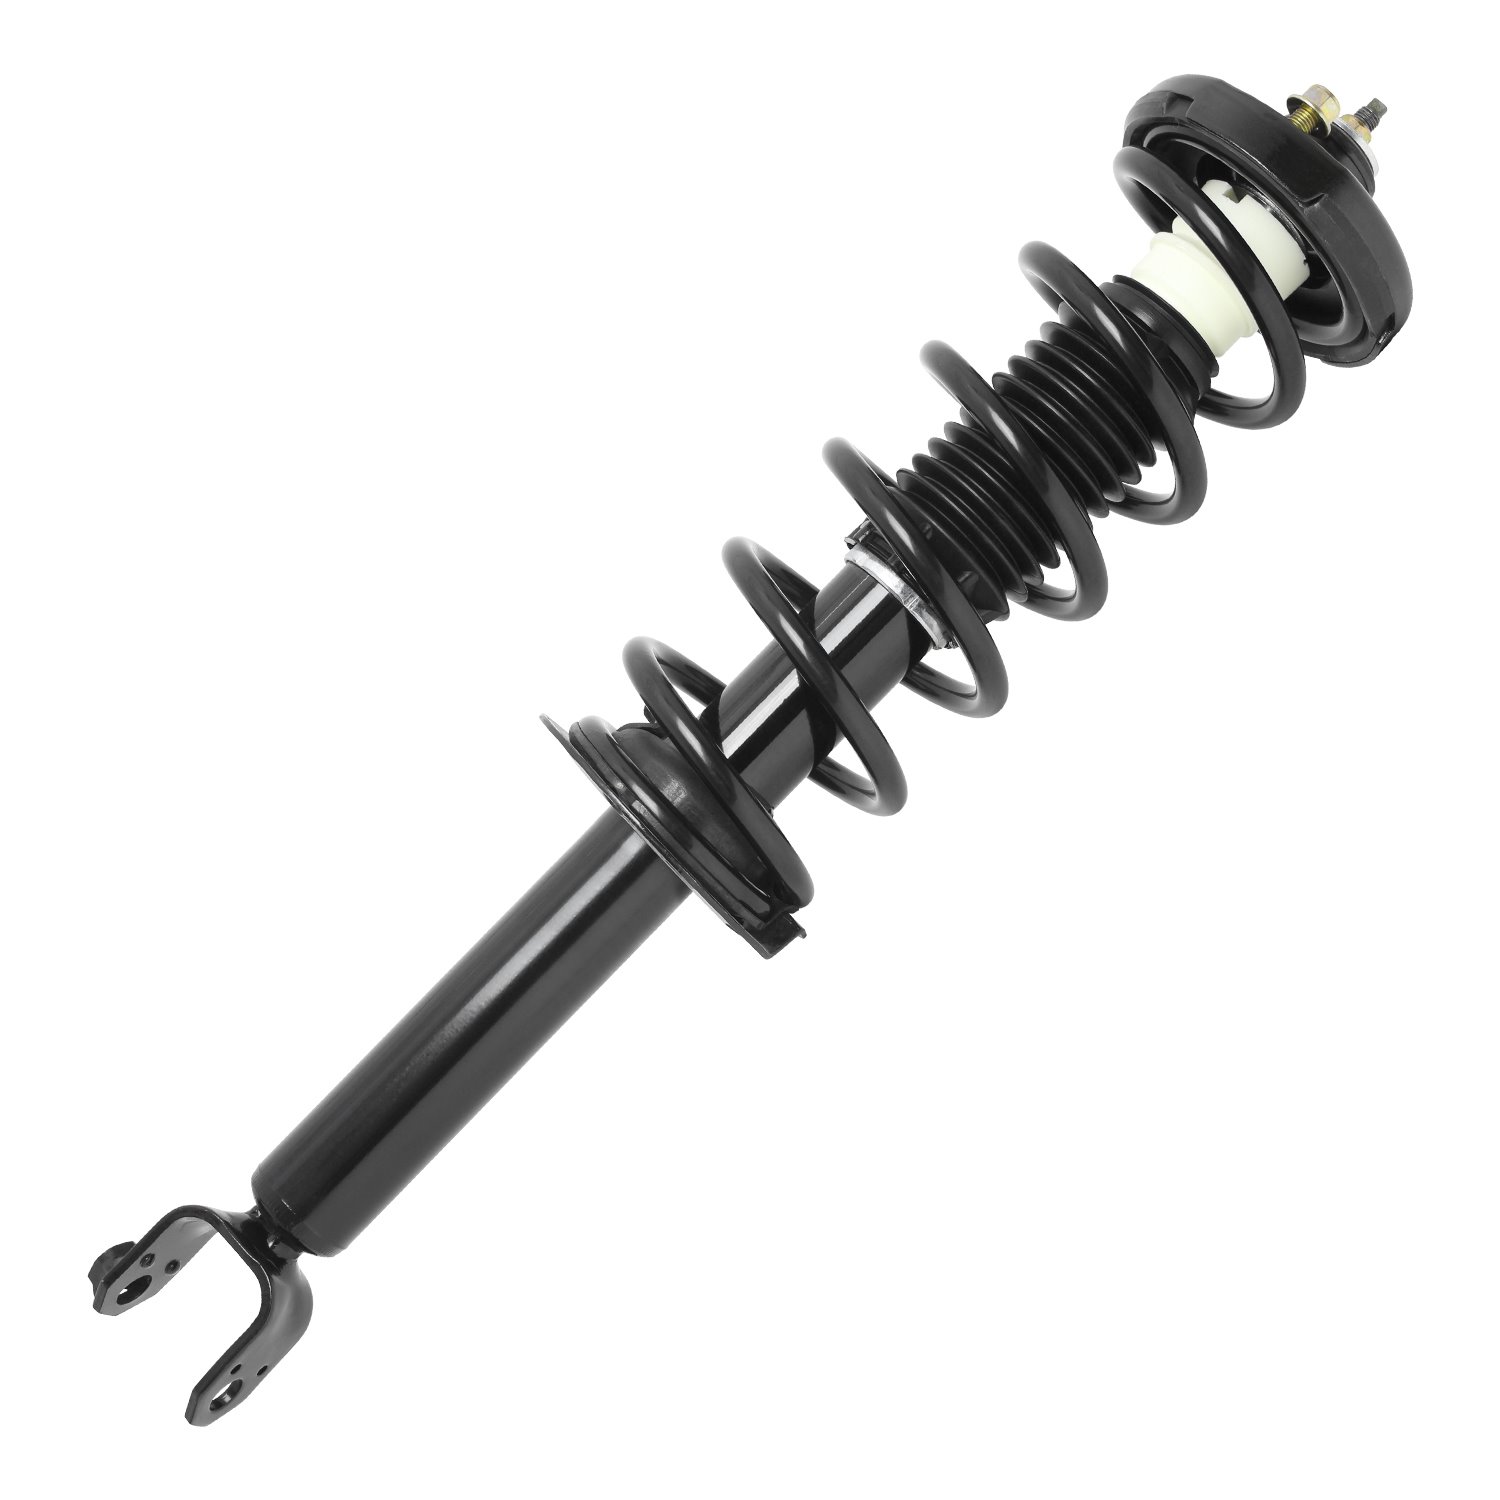 15011 Suspension Strut & Coil Spring Assembly Fits Select Acura TSX, Acura TL